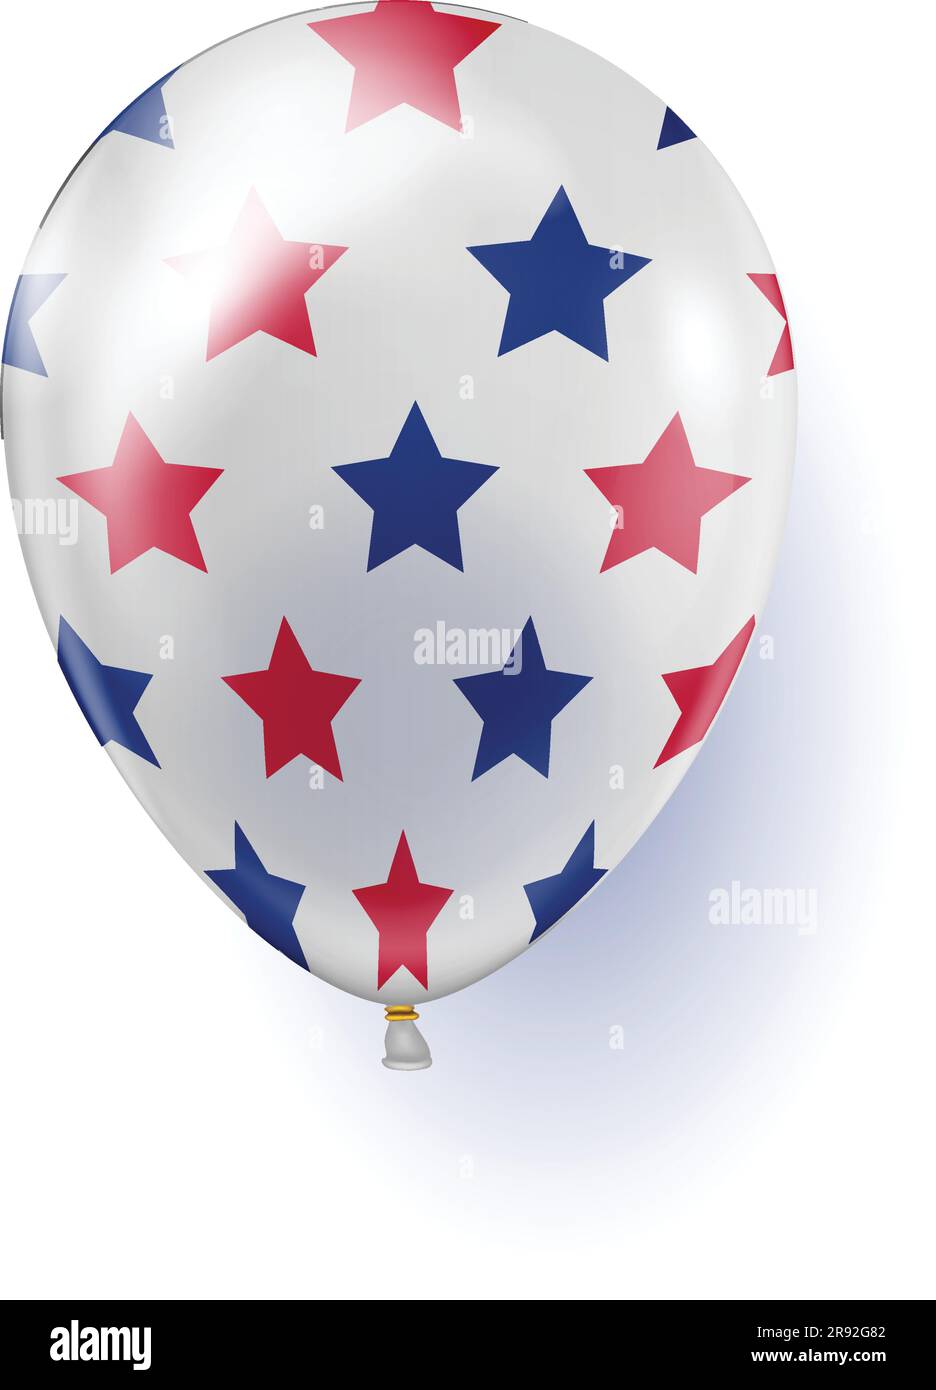 White ball with red and blue stars. Stock Vector